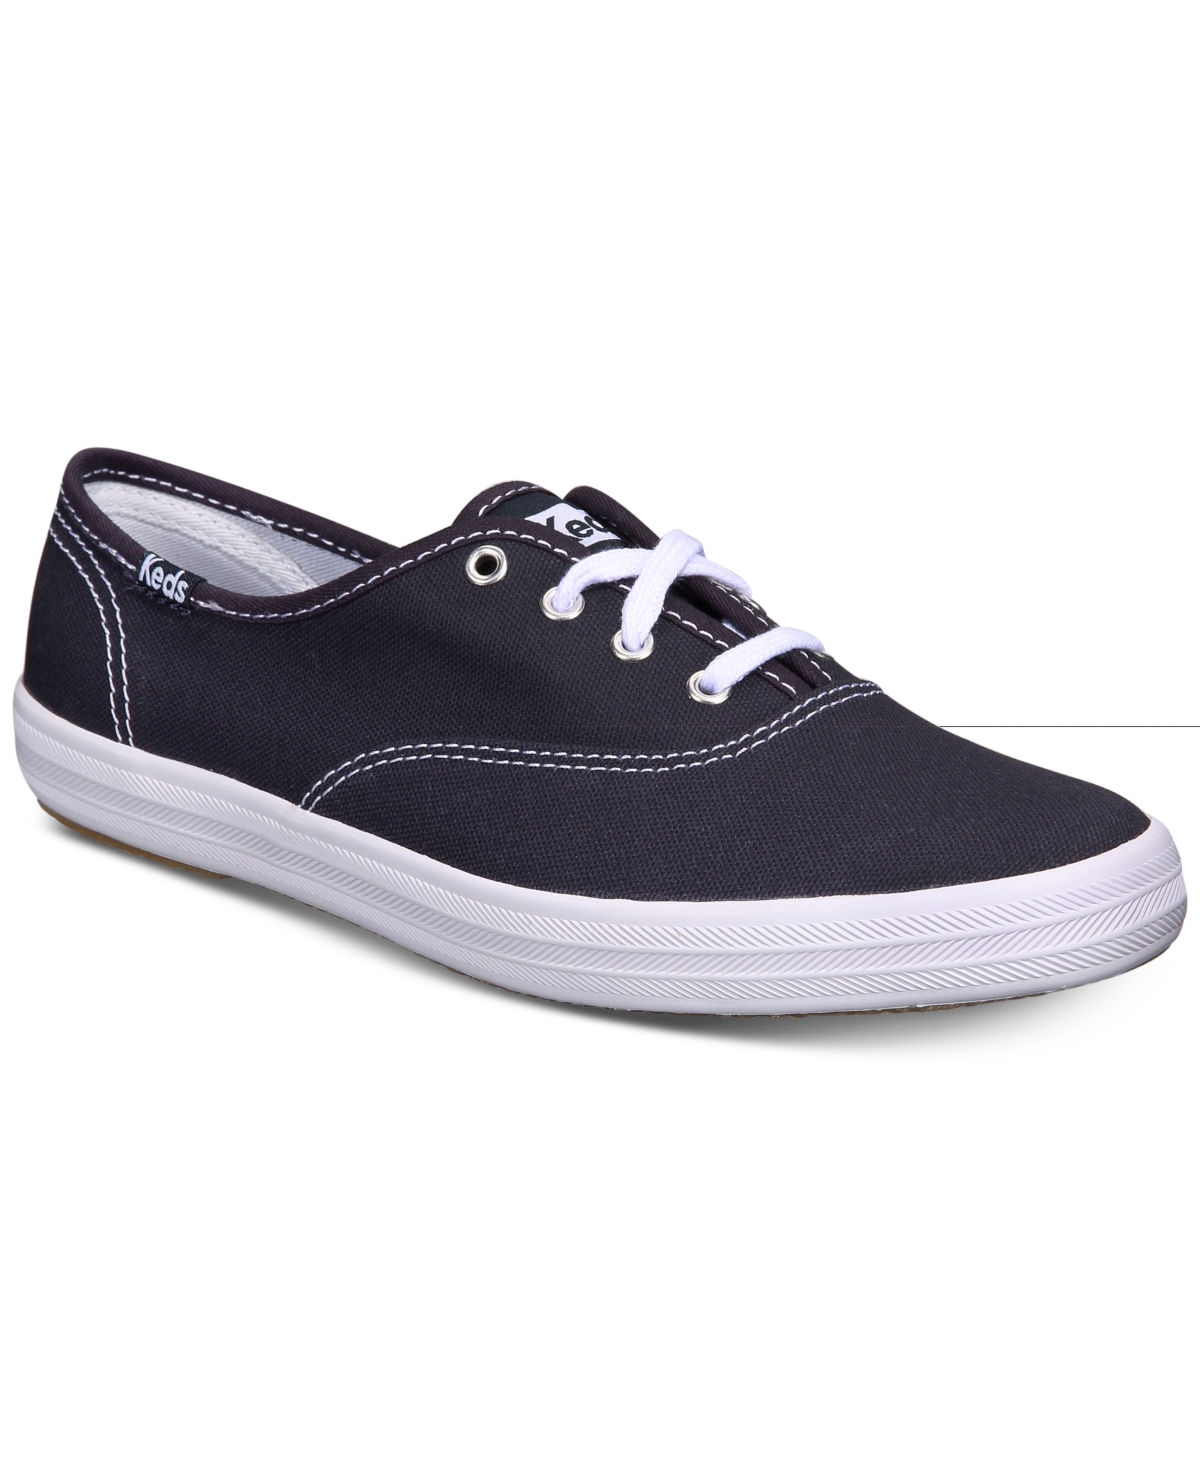 UPC 044209486234 product image for Keds Women's Champion Ortholite Lace-Up Oxford Fashion Sneakers | upcitemdb.com